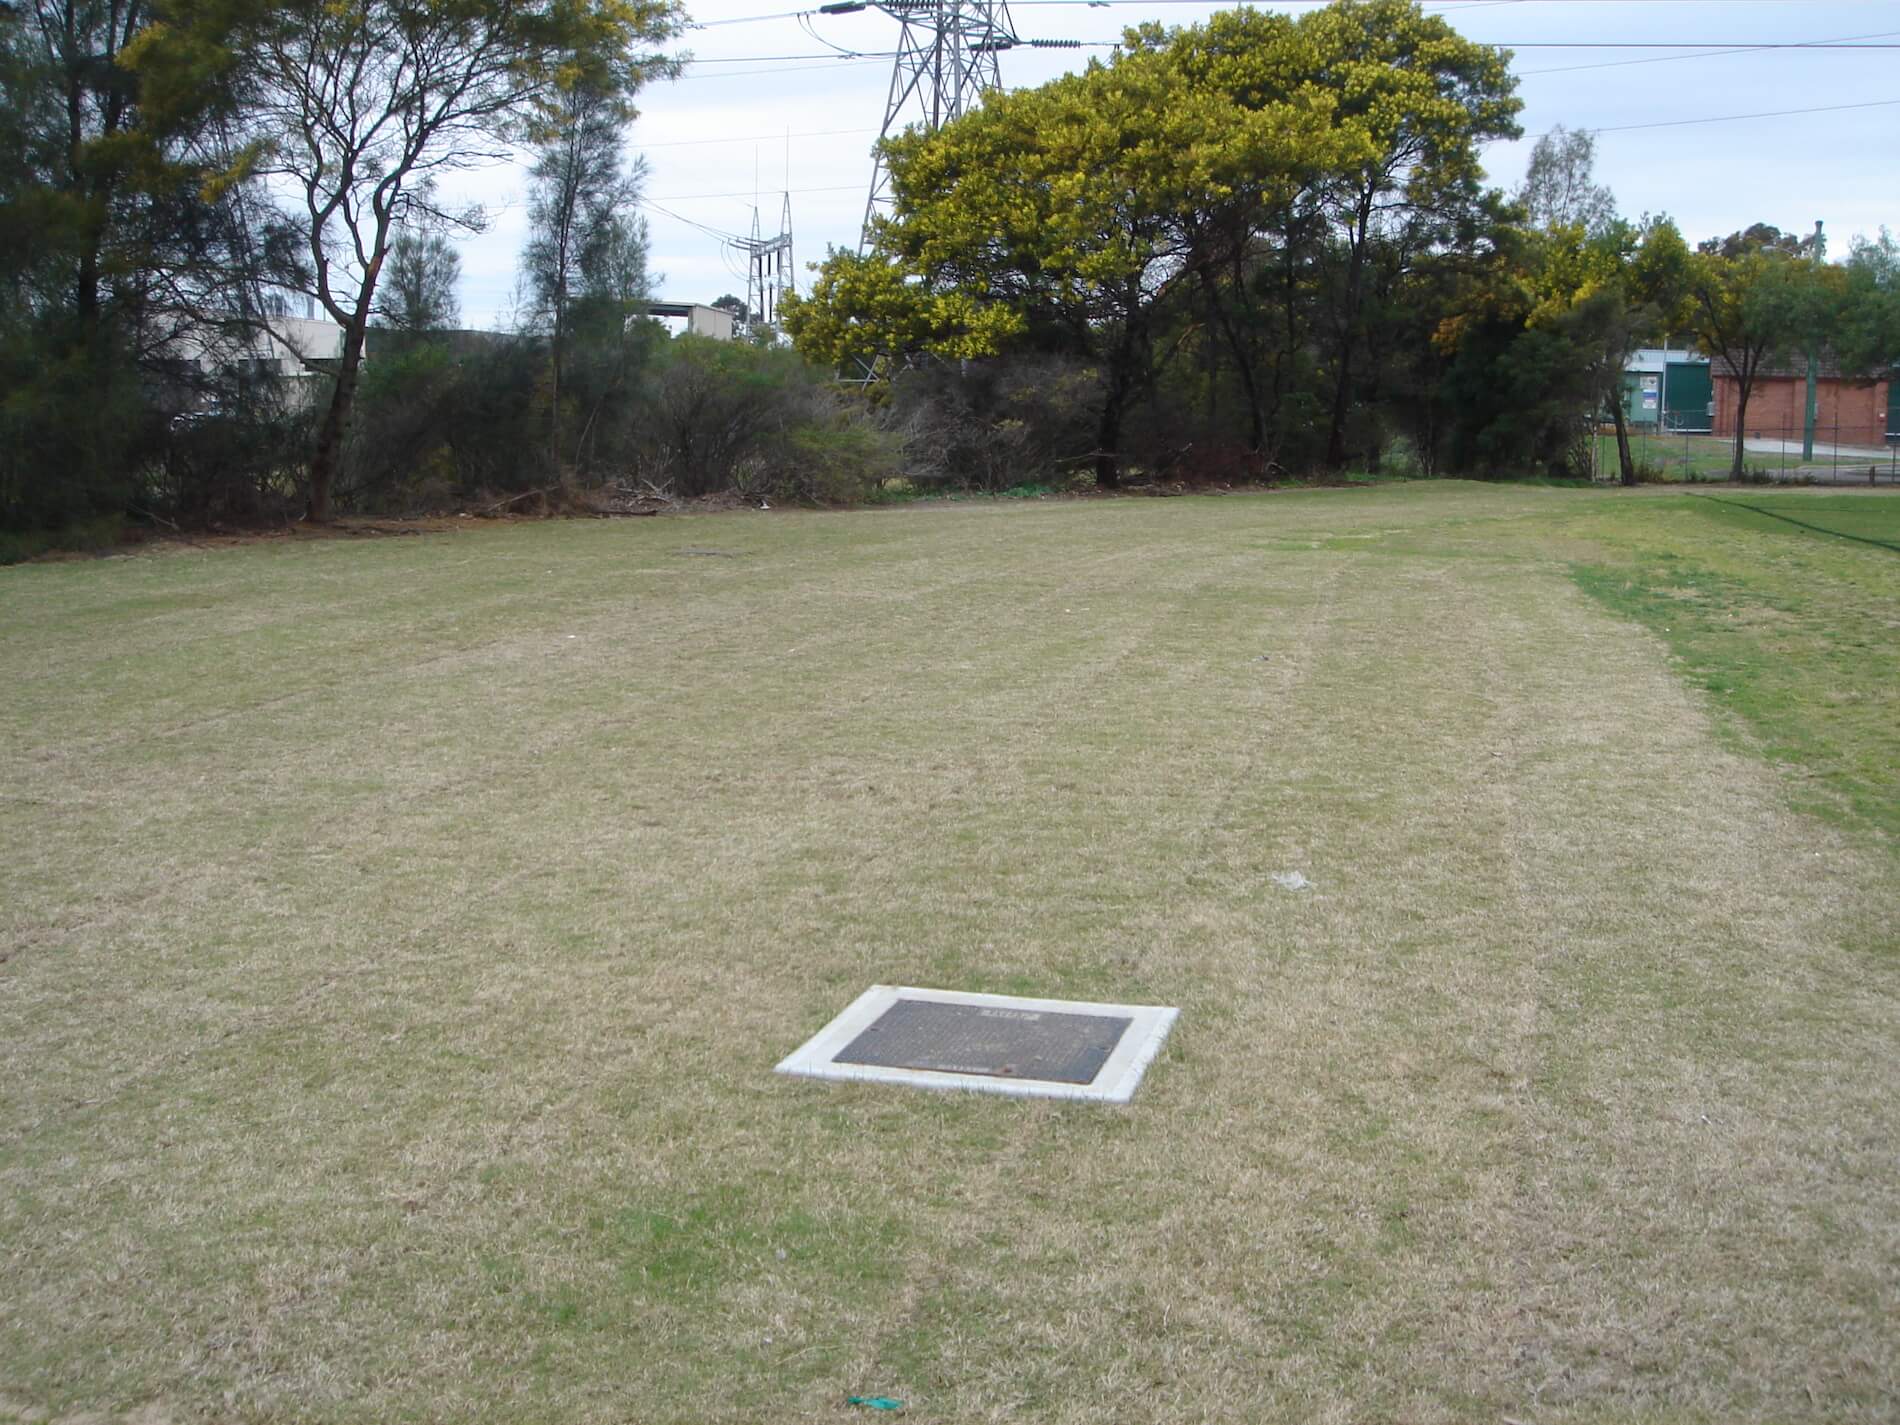 Municipal stormwater harvesting for reuse in sportsfield irrigation